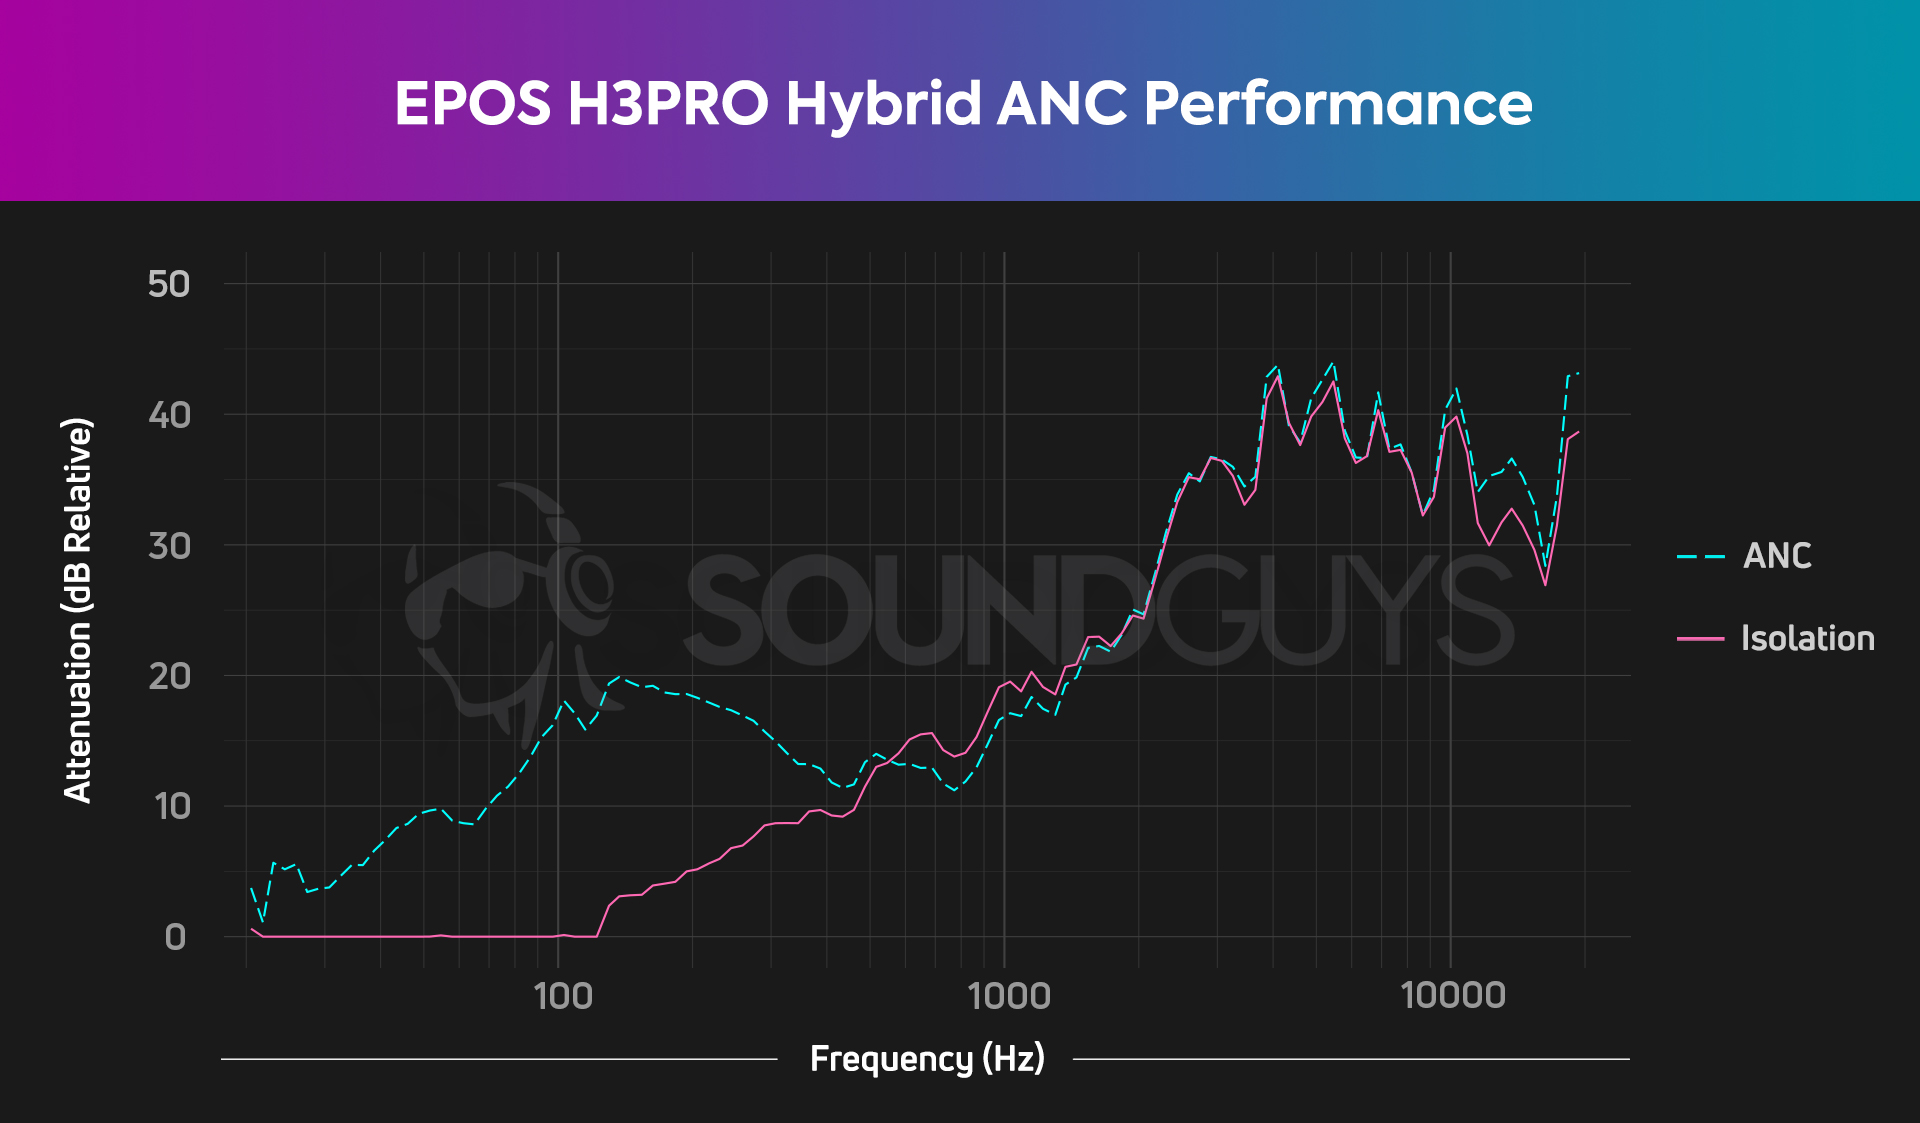 A noise canceling chart for the EPOS H3PRO Hybrid